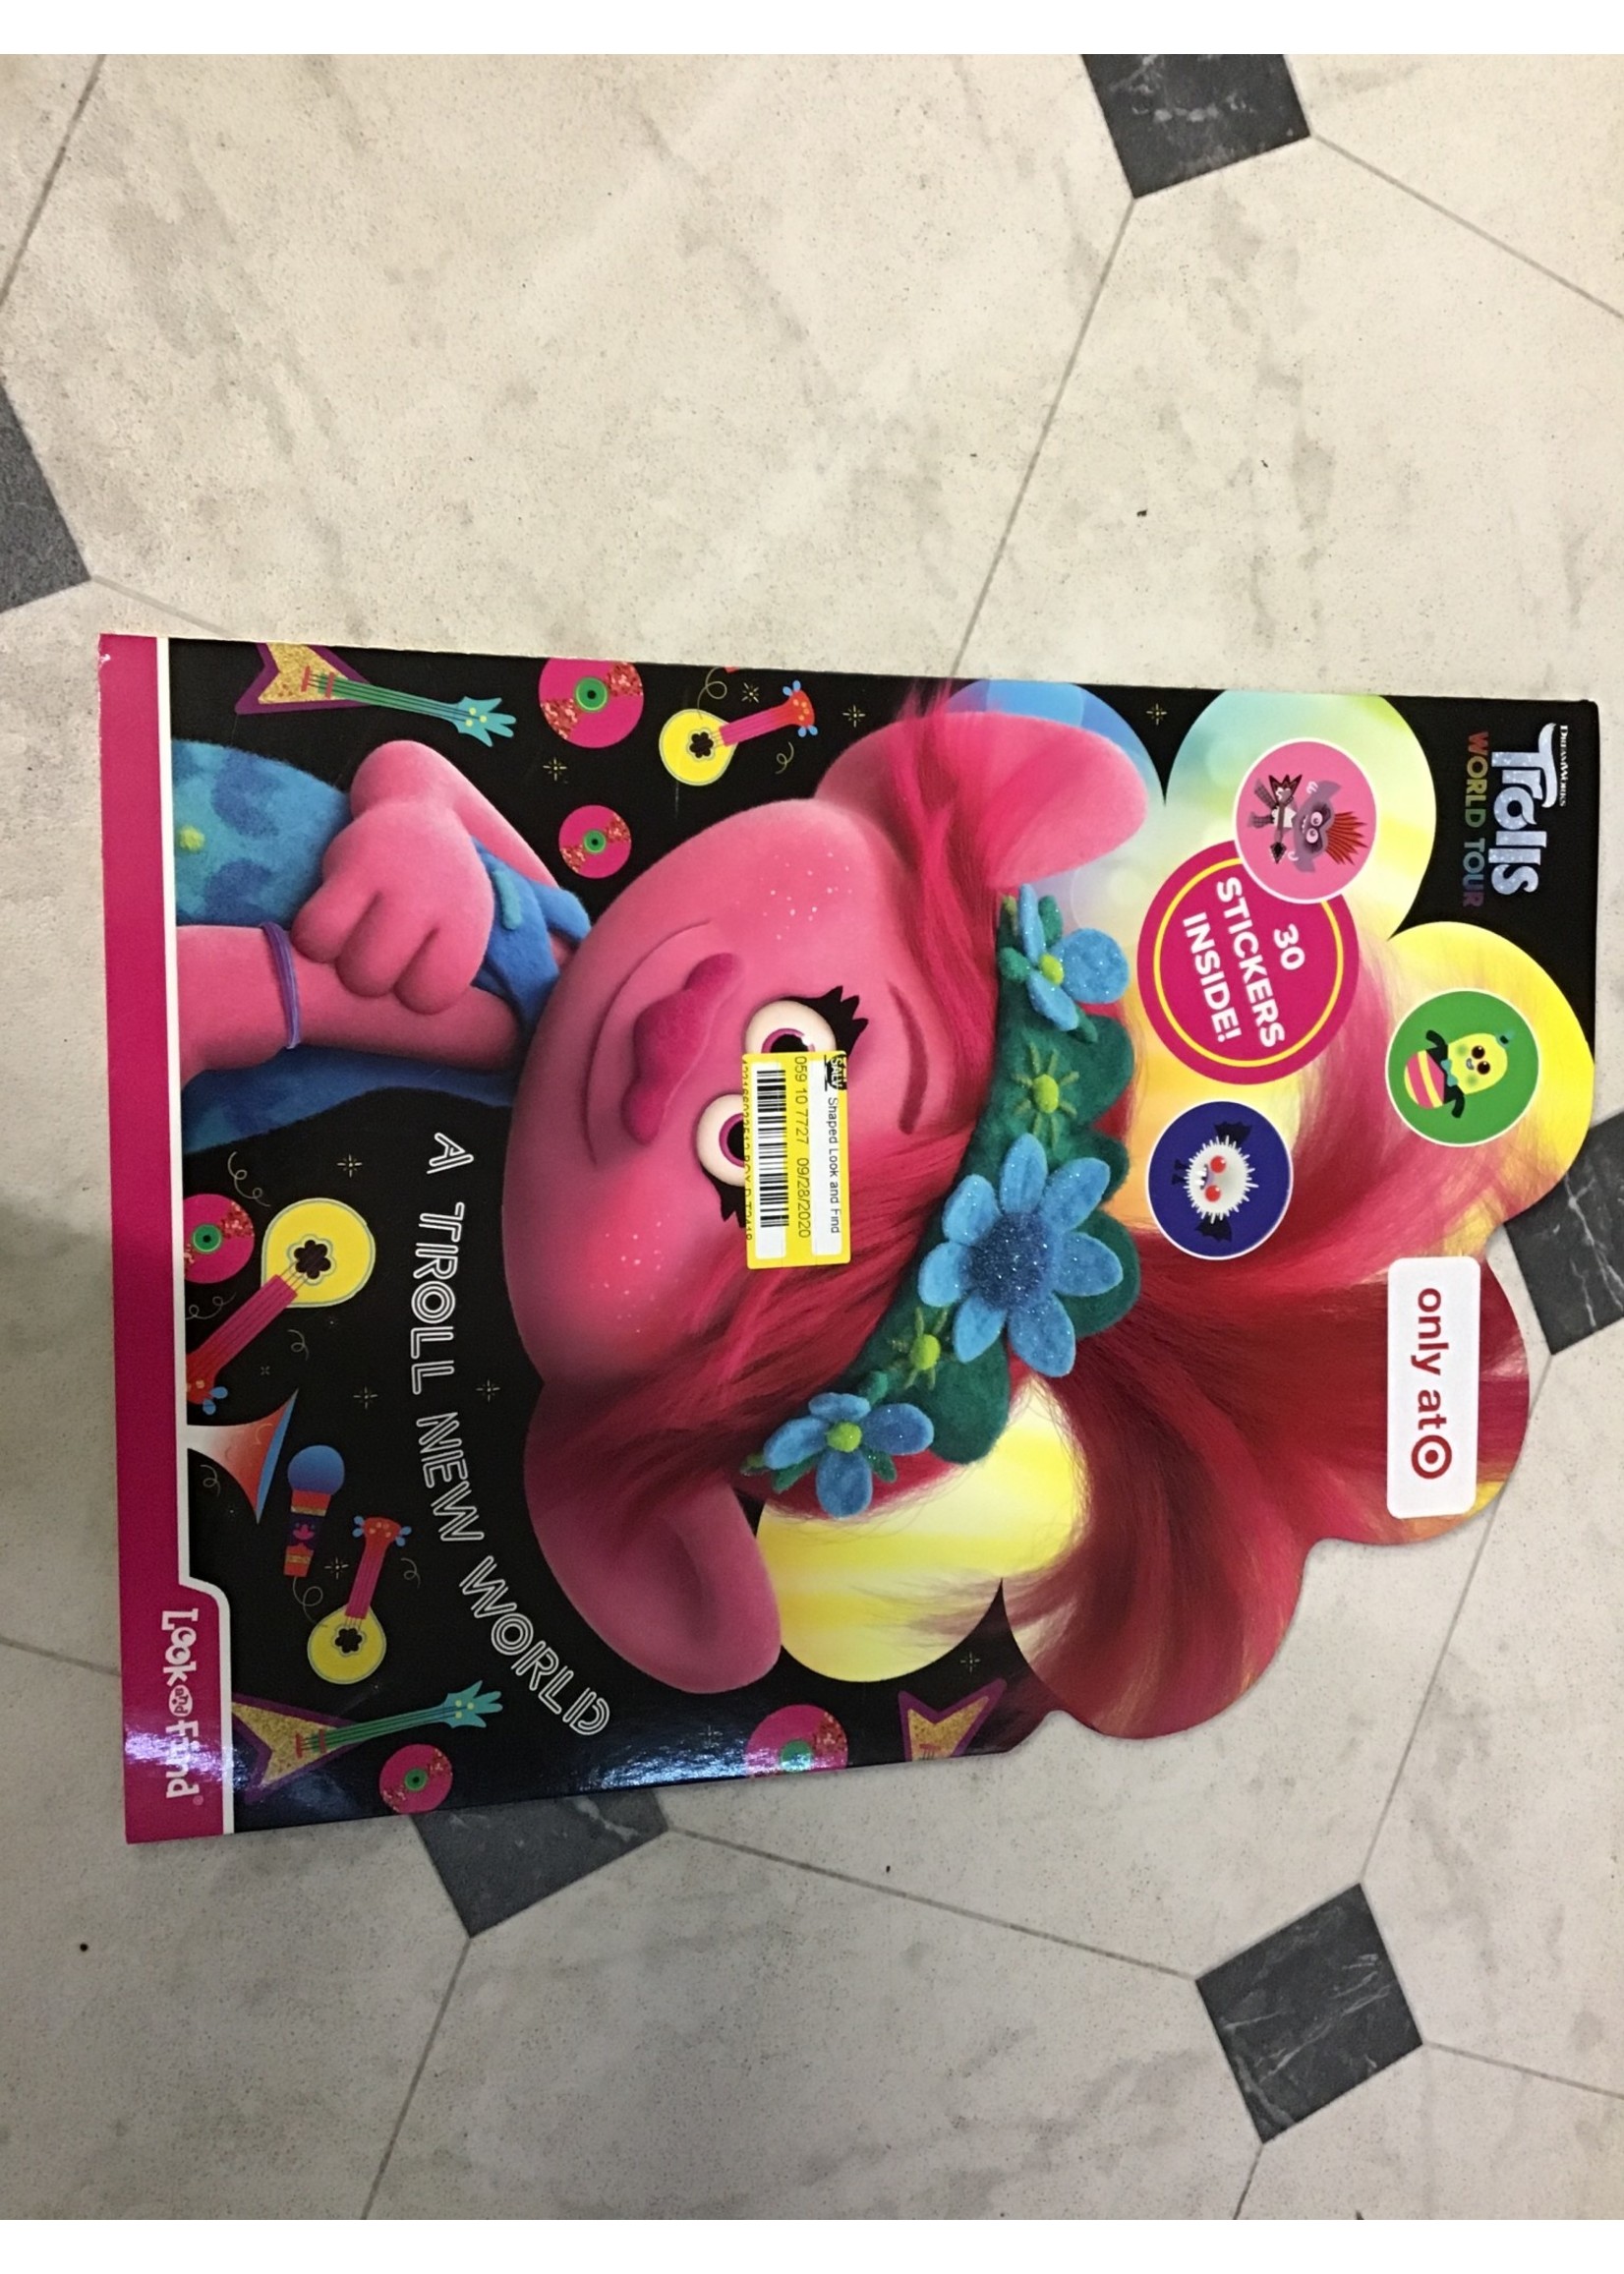 DreamWorks Trolls World Tour - A Troll New World Look and Find - Target Exclusive Edition by Erin Rose Wage (Paperback)